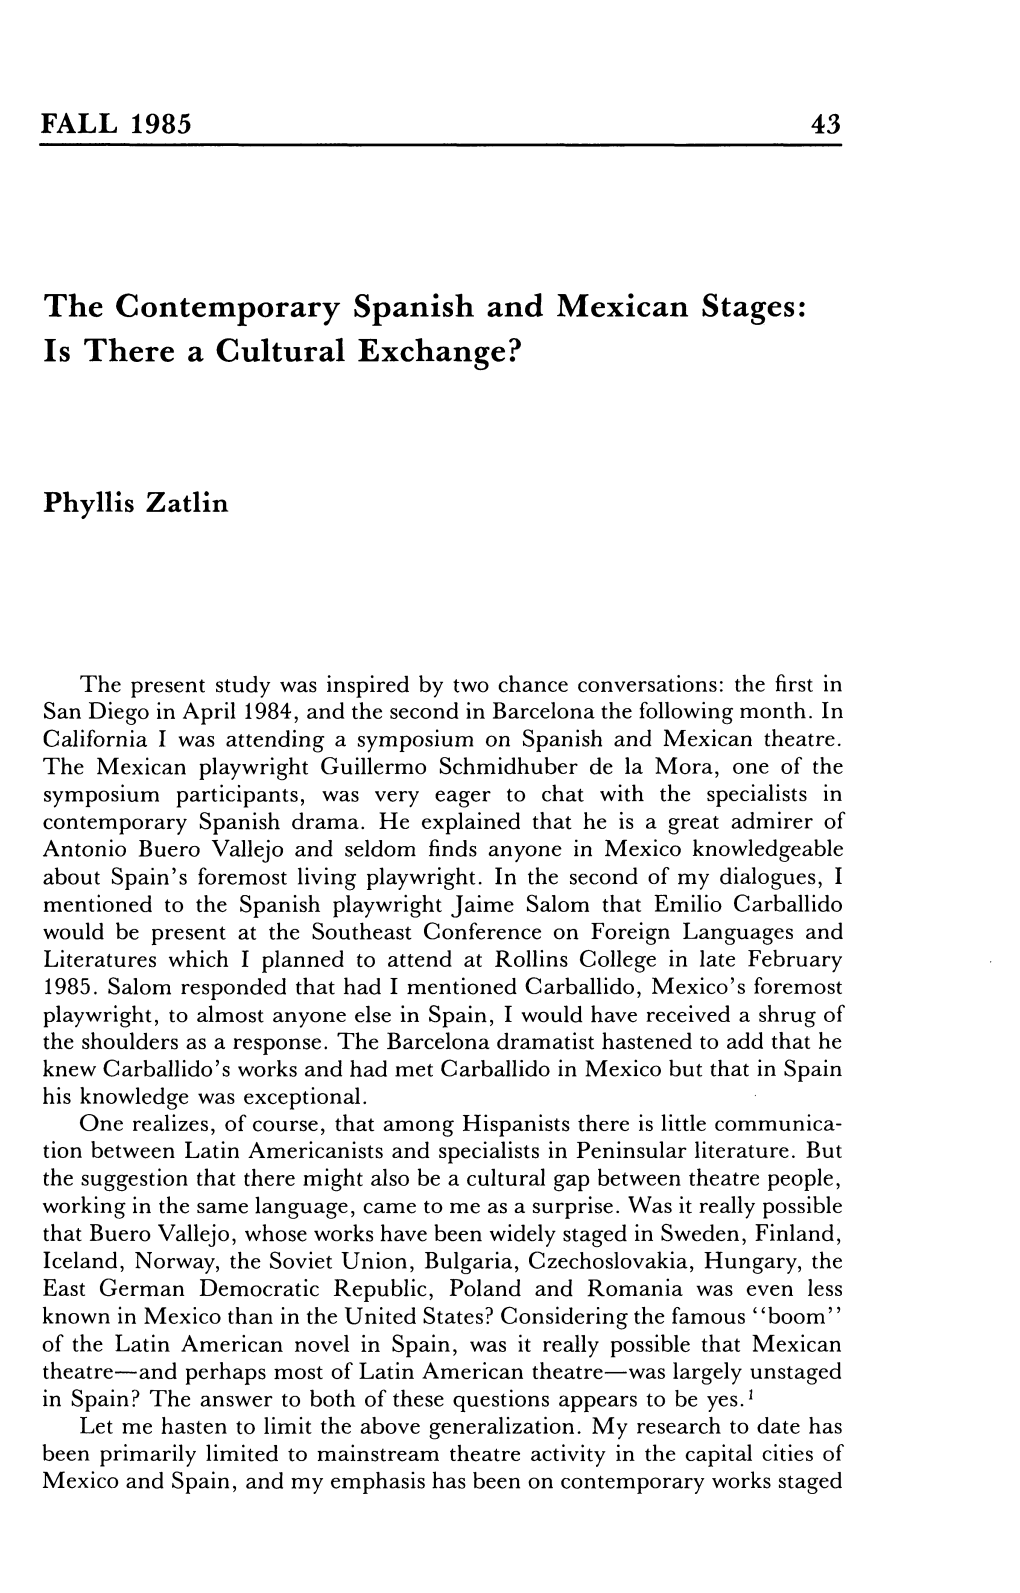 The Contemporary Spanish and Mexican Stages: Is There a Cultural Exchange?